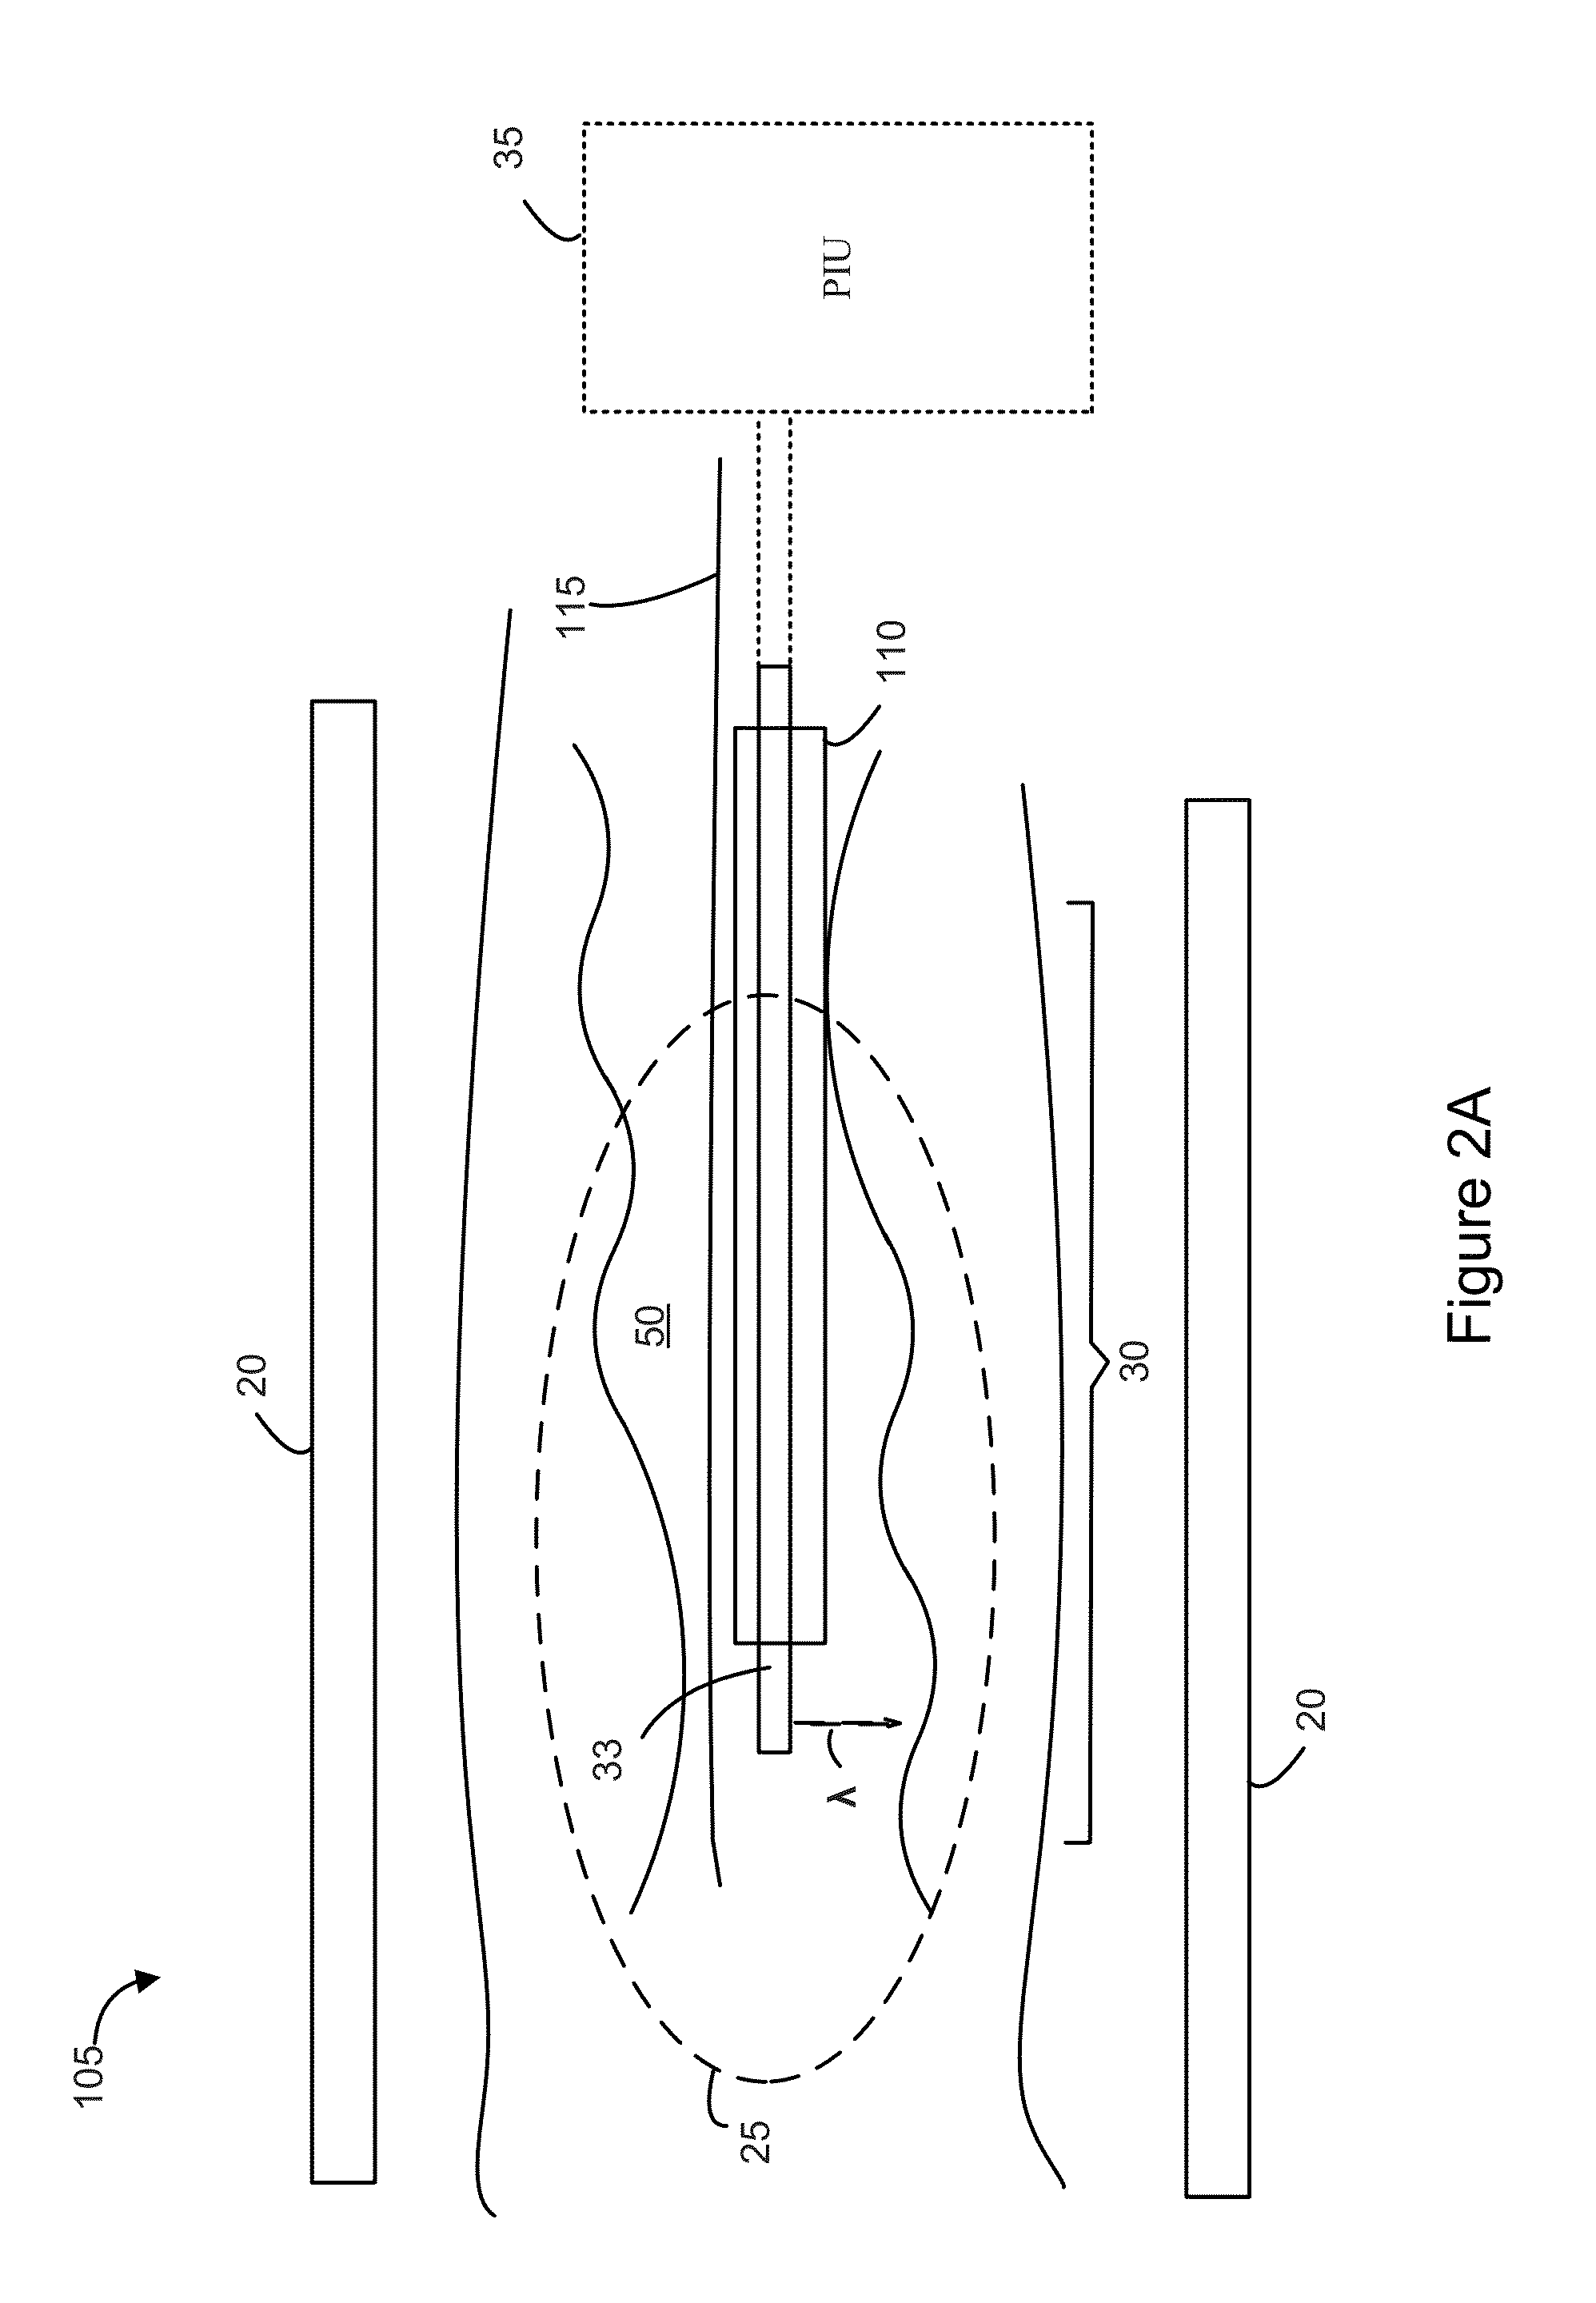 Vascular Data Processing and Image Registration Systems, Methods, and Apparatuses